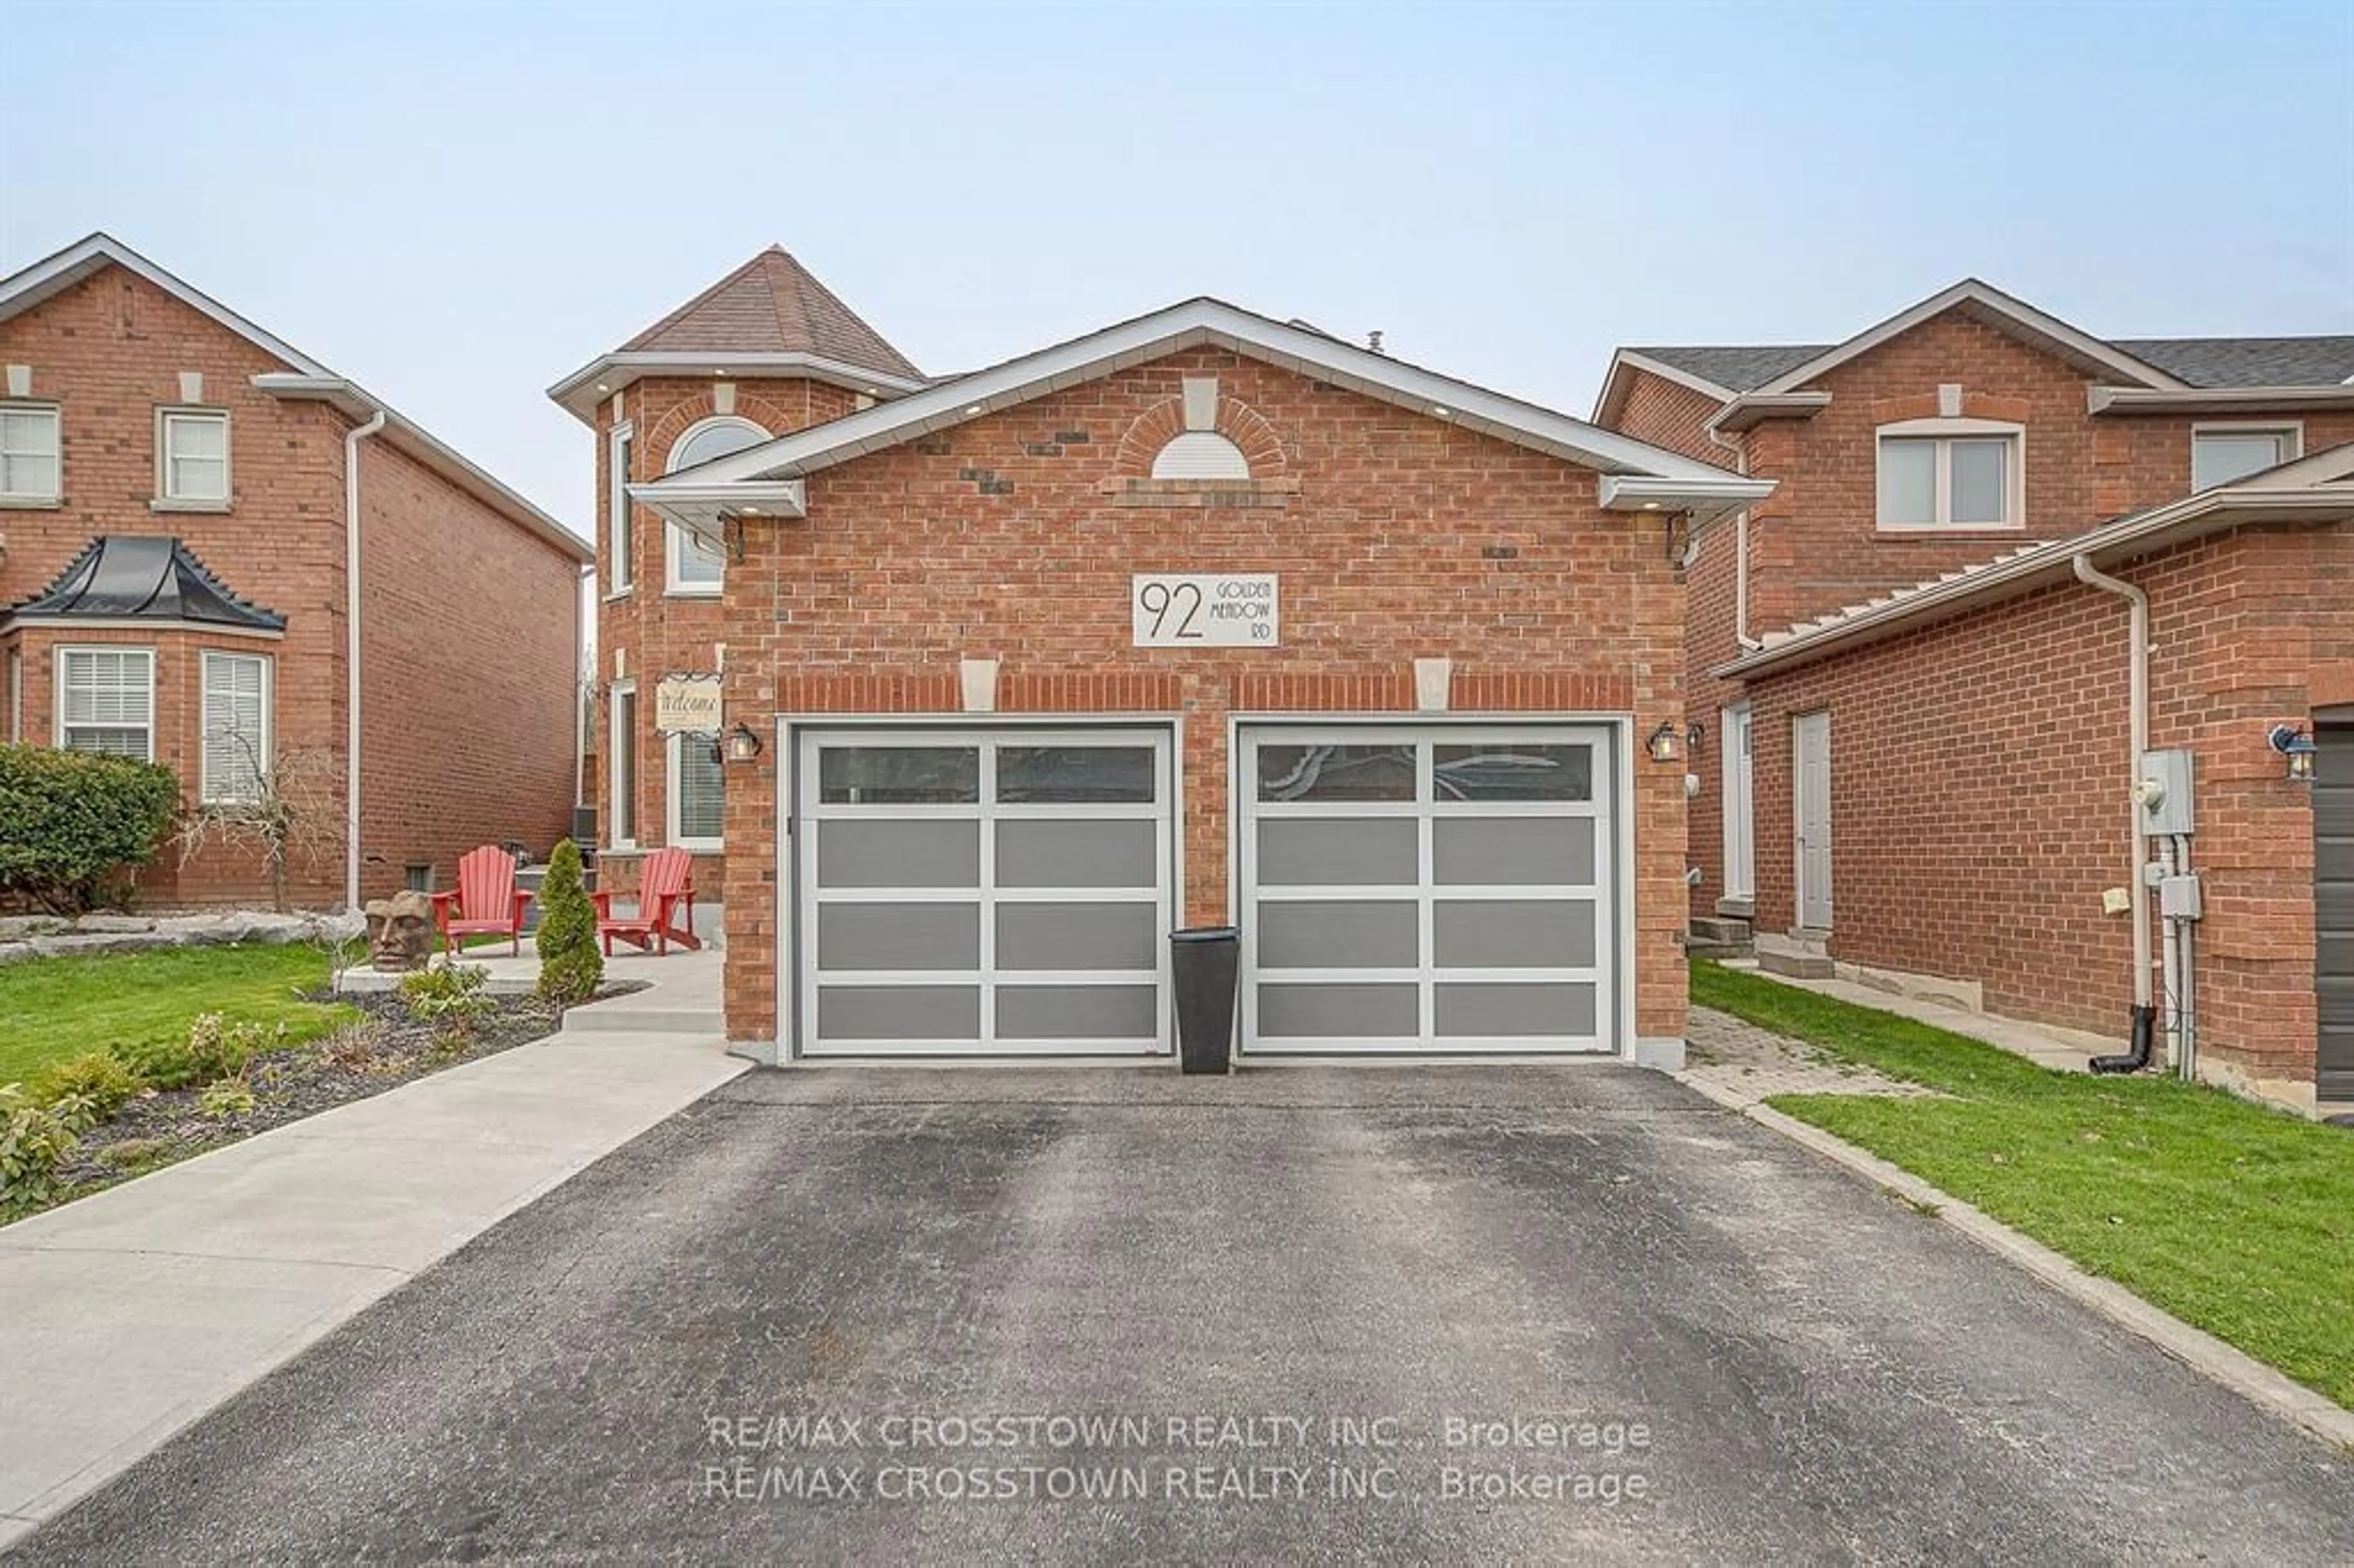 Home with brick exterior material for 92 Golden Meadow Rd, Barrie Ontario L4N 7G4